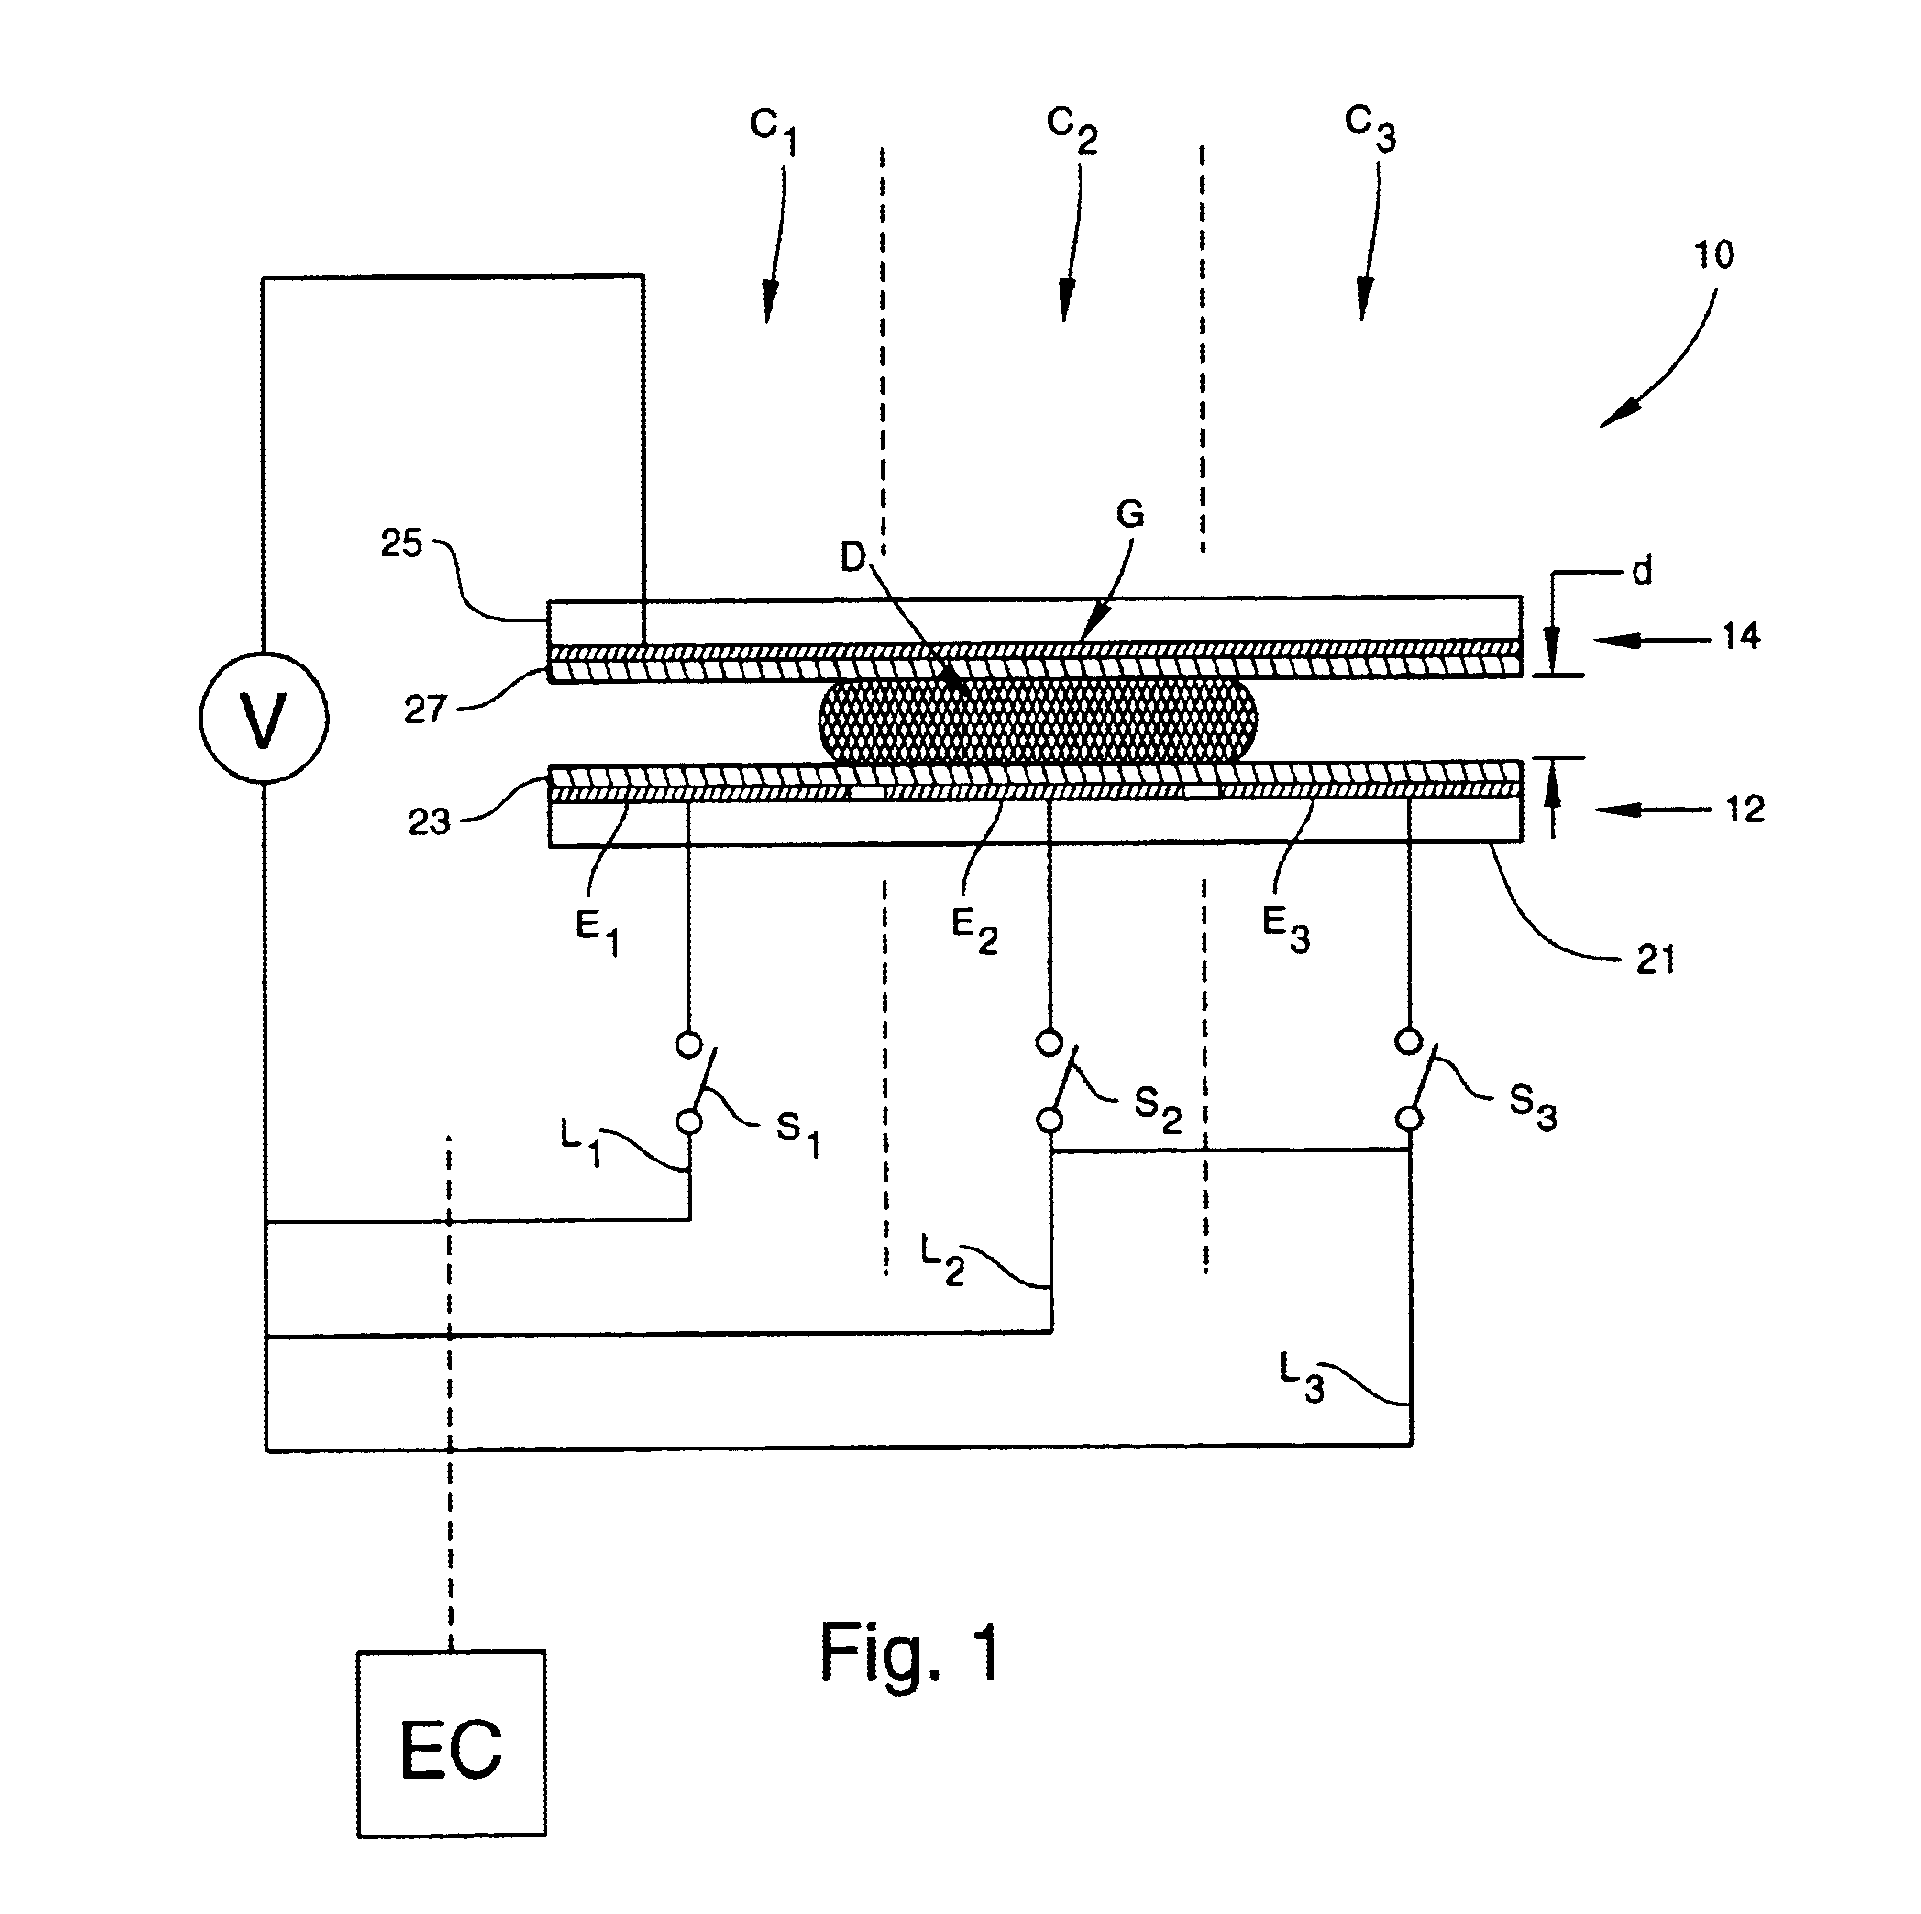 Apparatus for manipulating droplets by electrowetting-based techniques